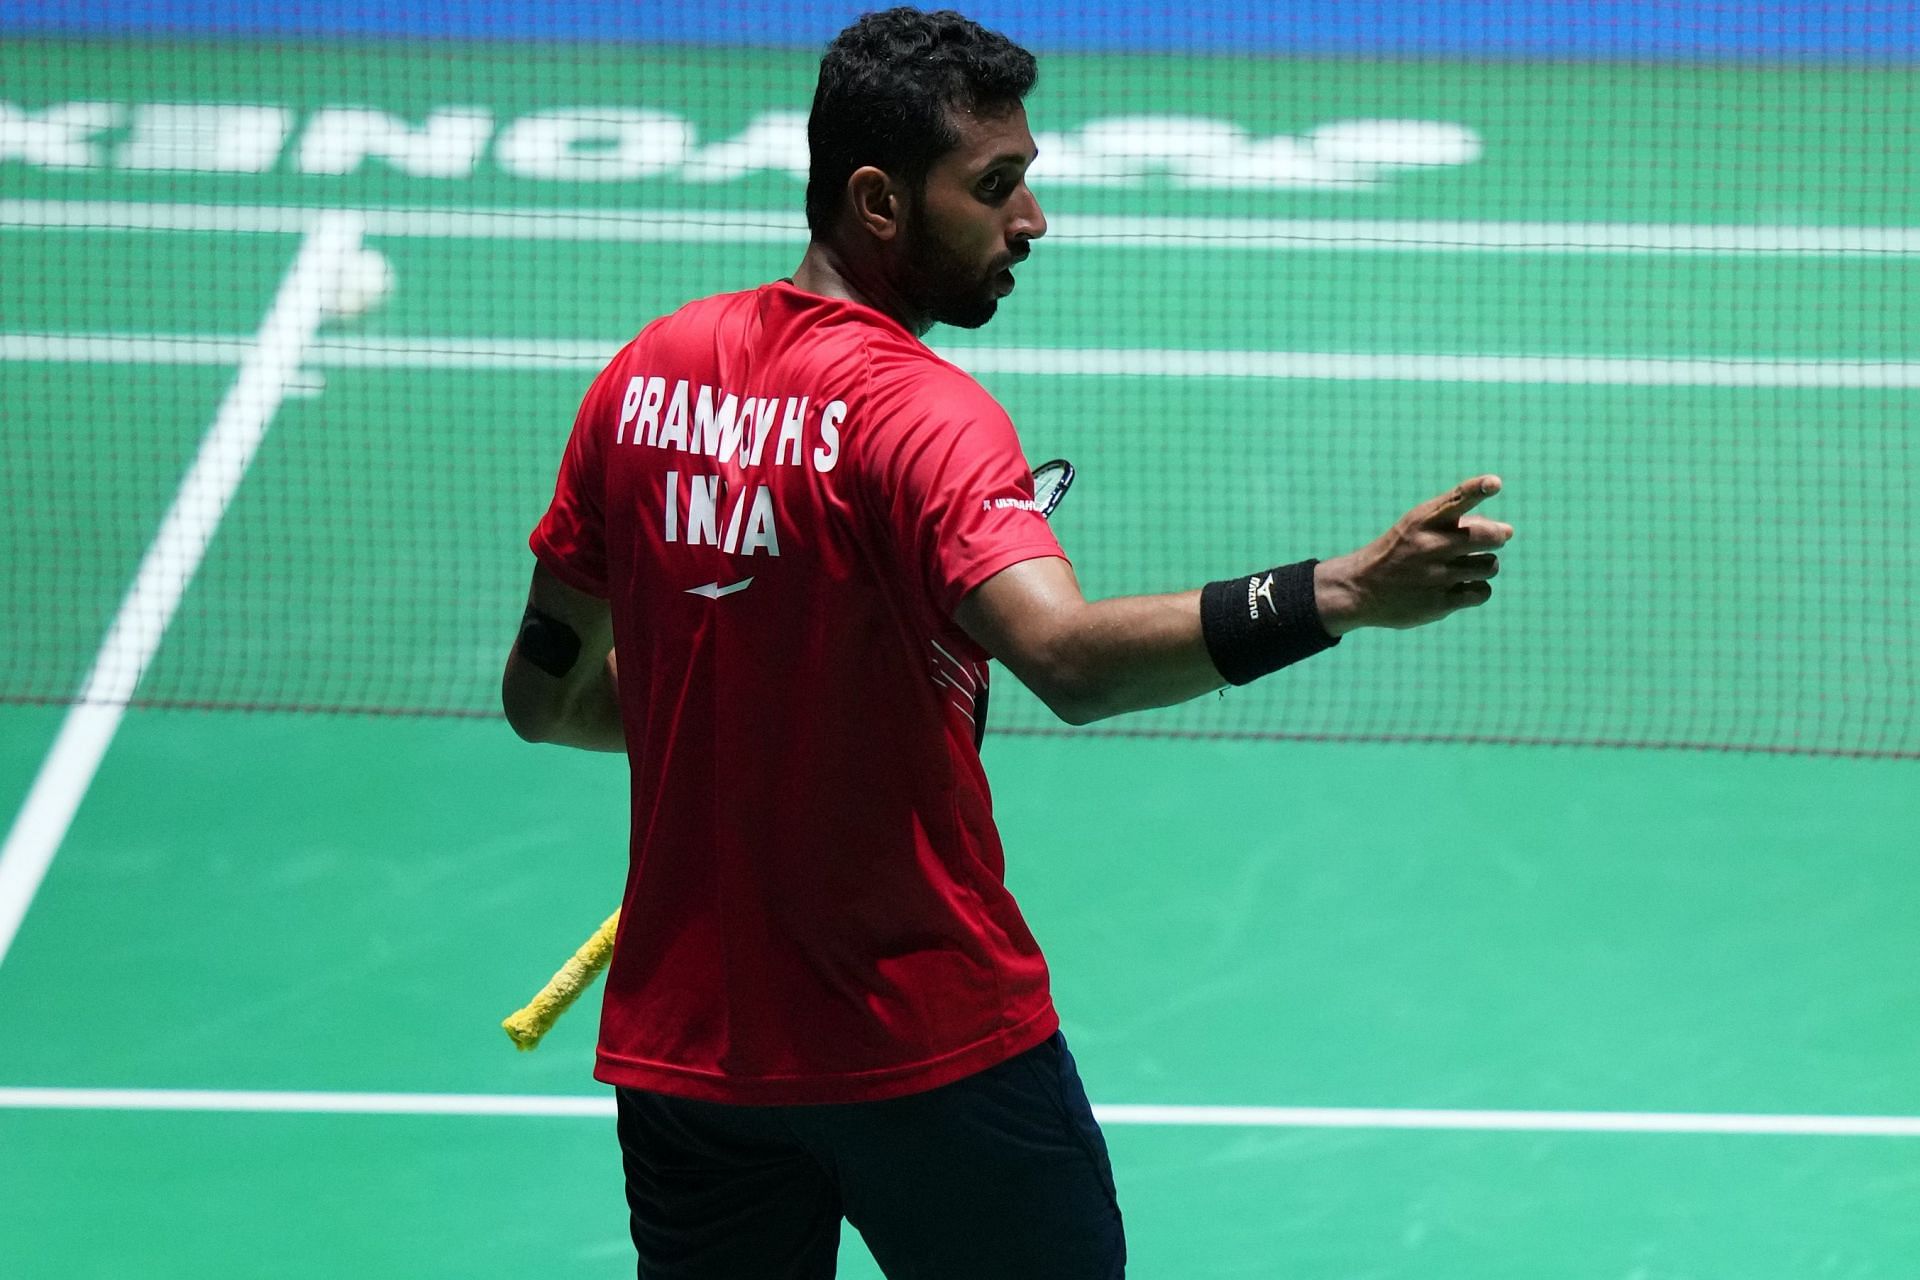 BWF World Tour Finals 2022 HS Prannoy vs Viktor Axelsen preview, head-to-head, prediction, where to watch and live streaming details